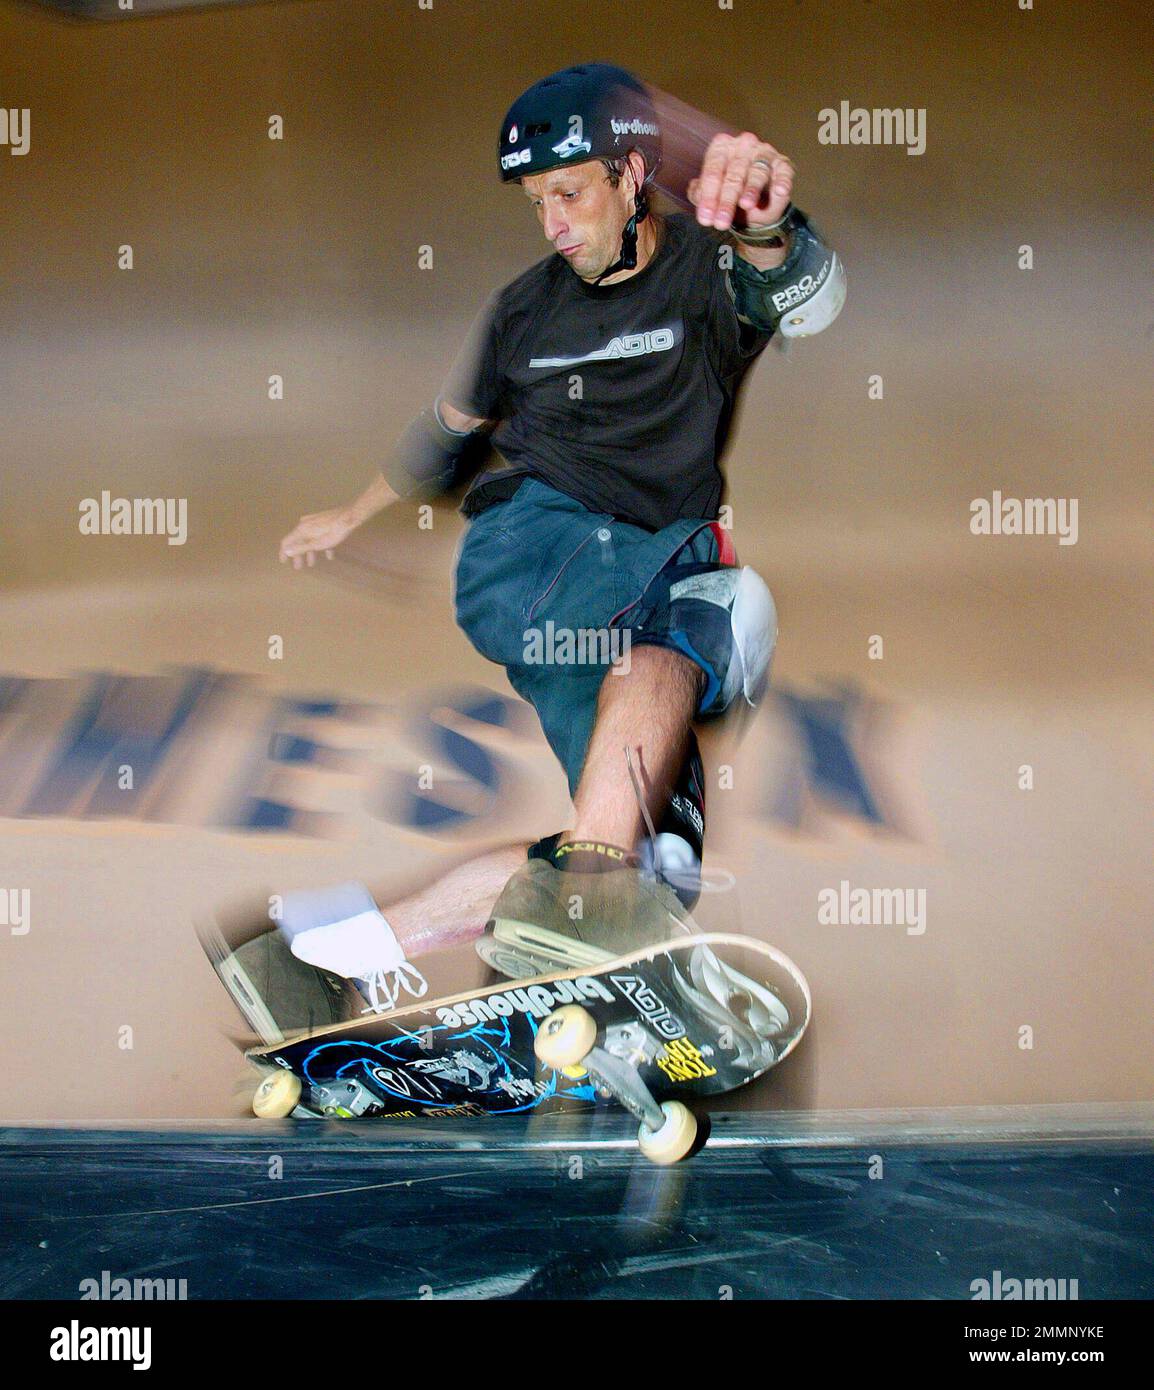 FILE - In this Friday, Aug. 15, 2003 file photo, Tony Hawk of Carlsbad,  Calif. slides a rail during the X-Games - skateboard vert practice held at  the Staples Center in Los